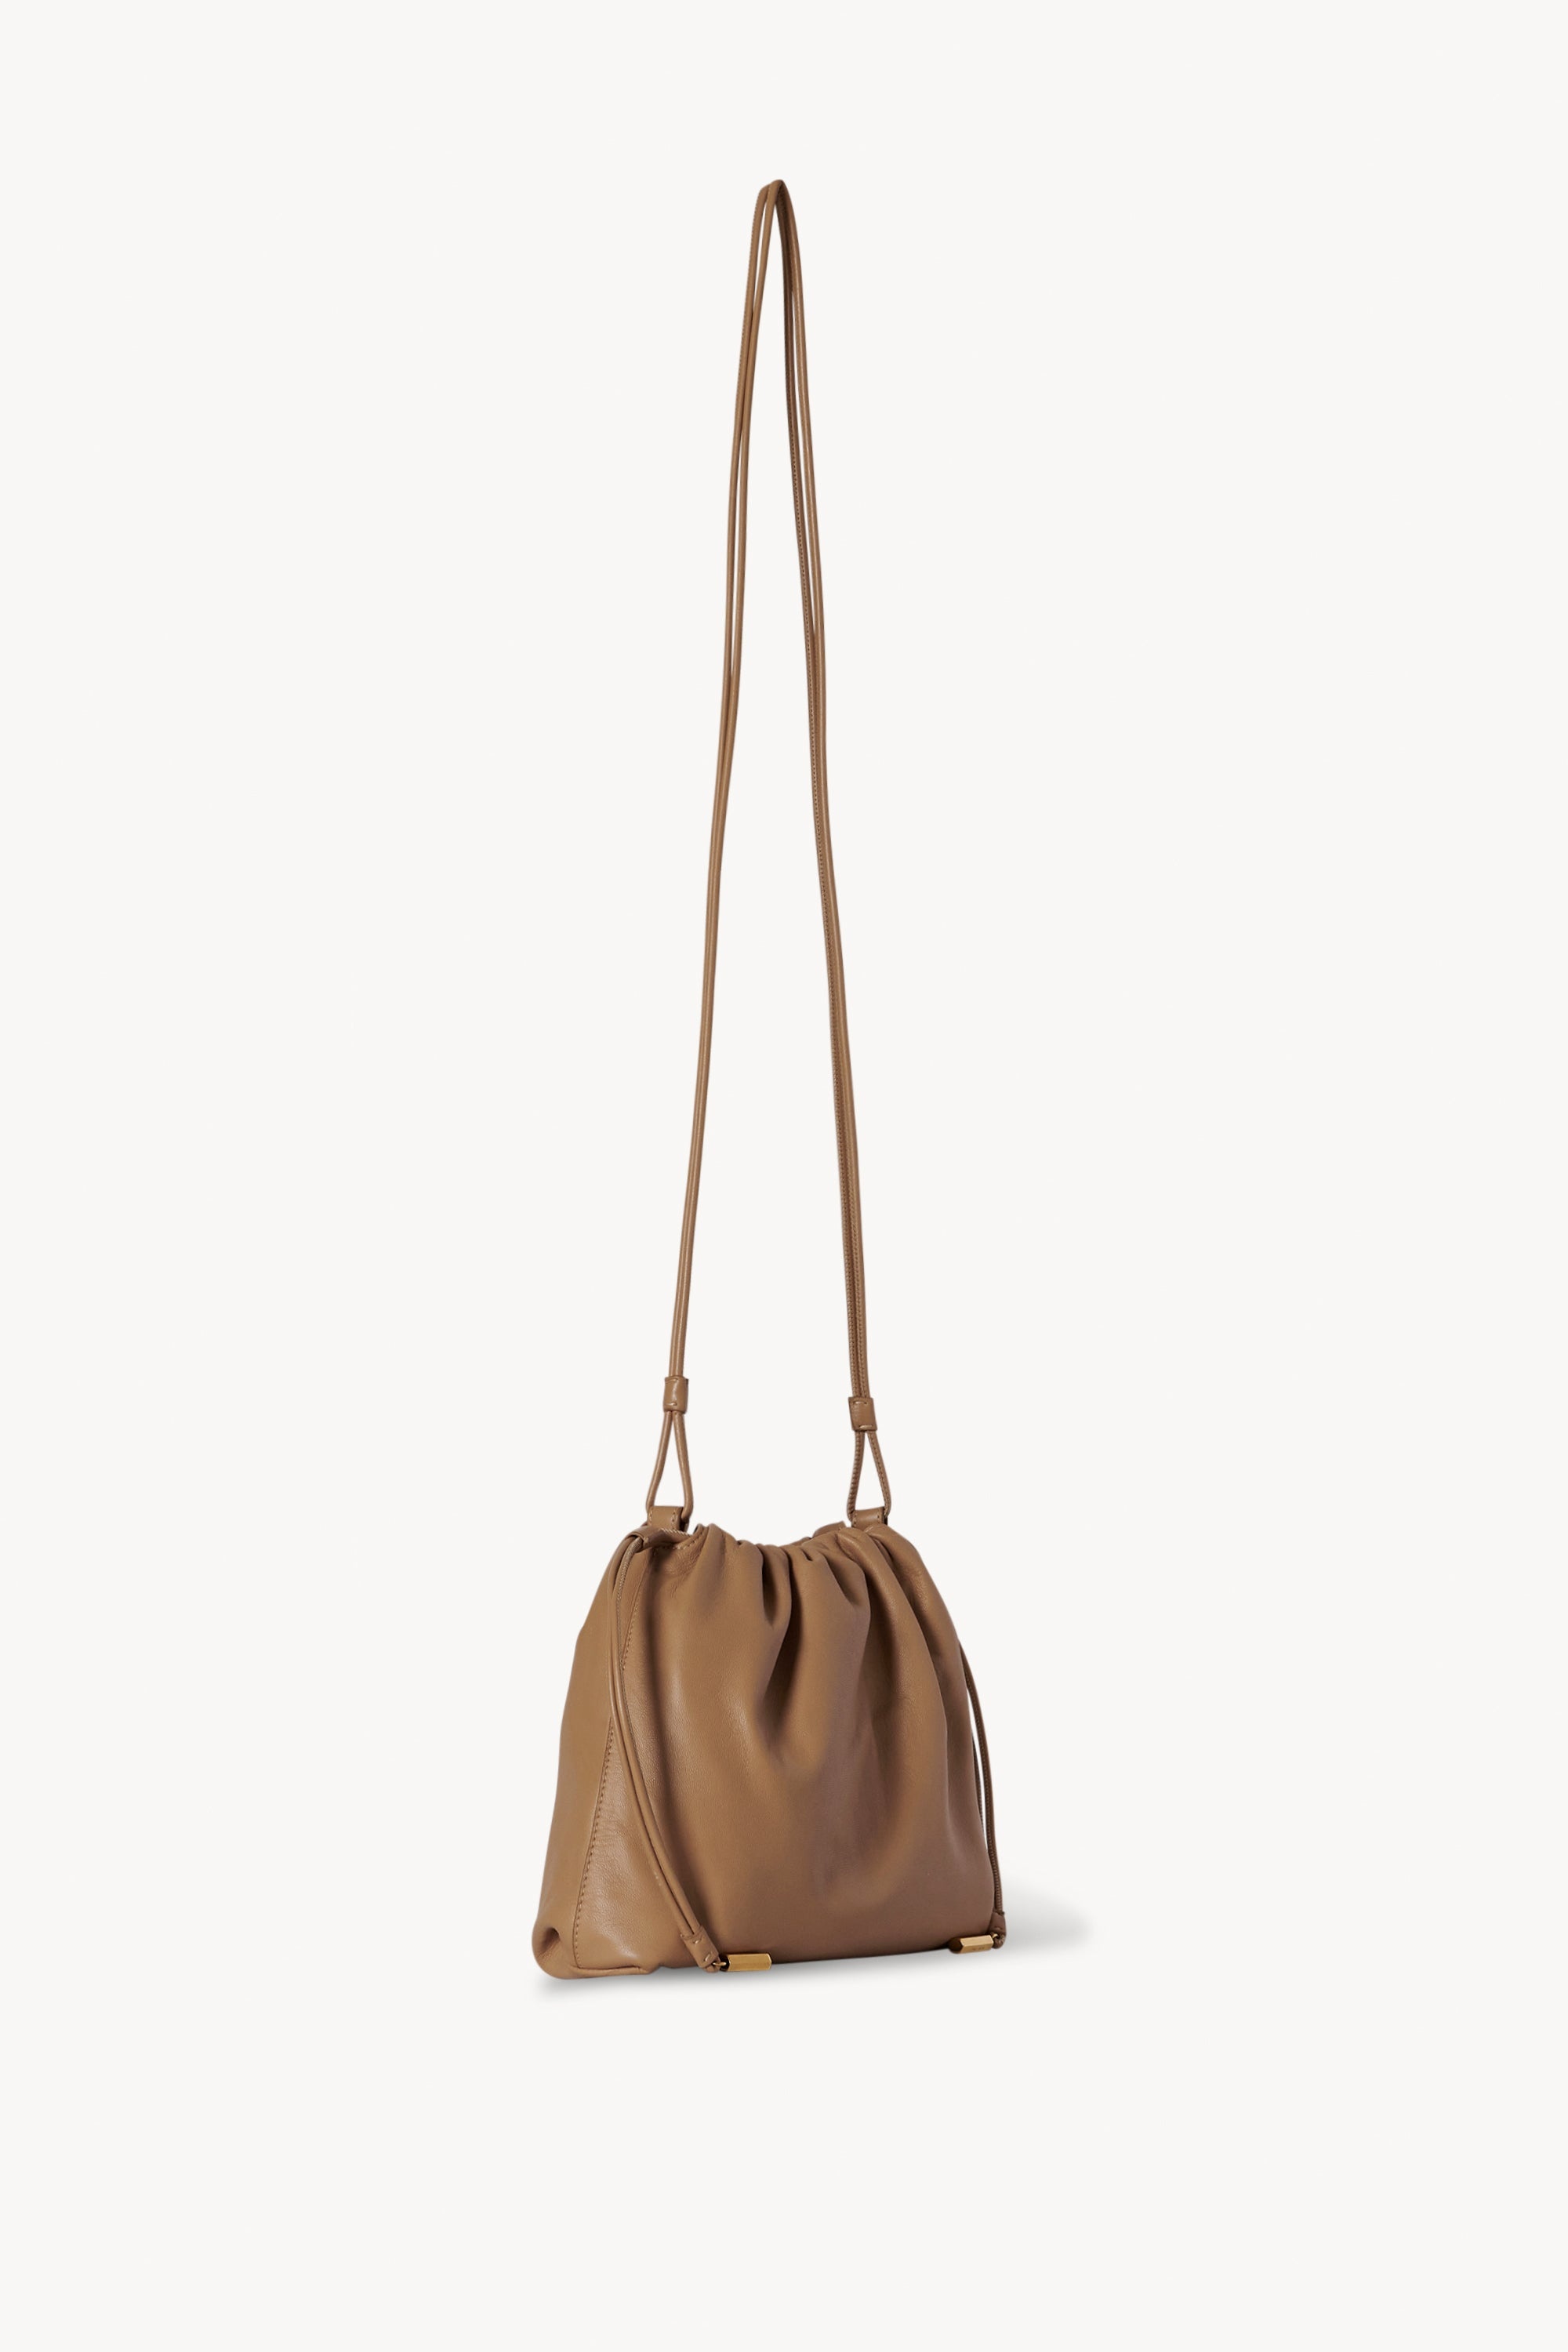 Angy Bag in Leather - 2